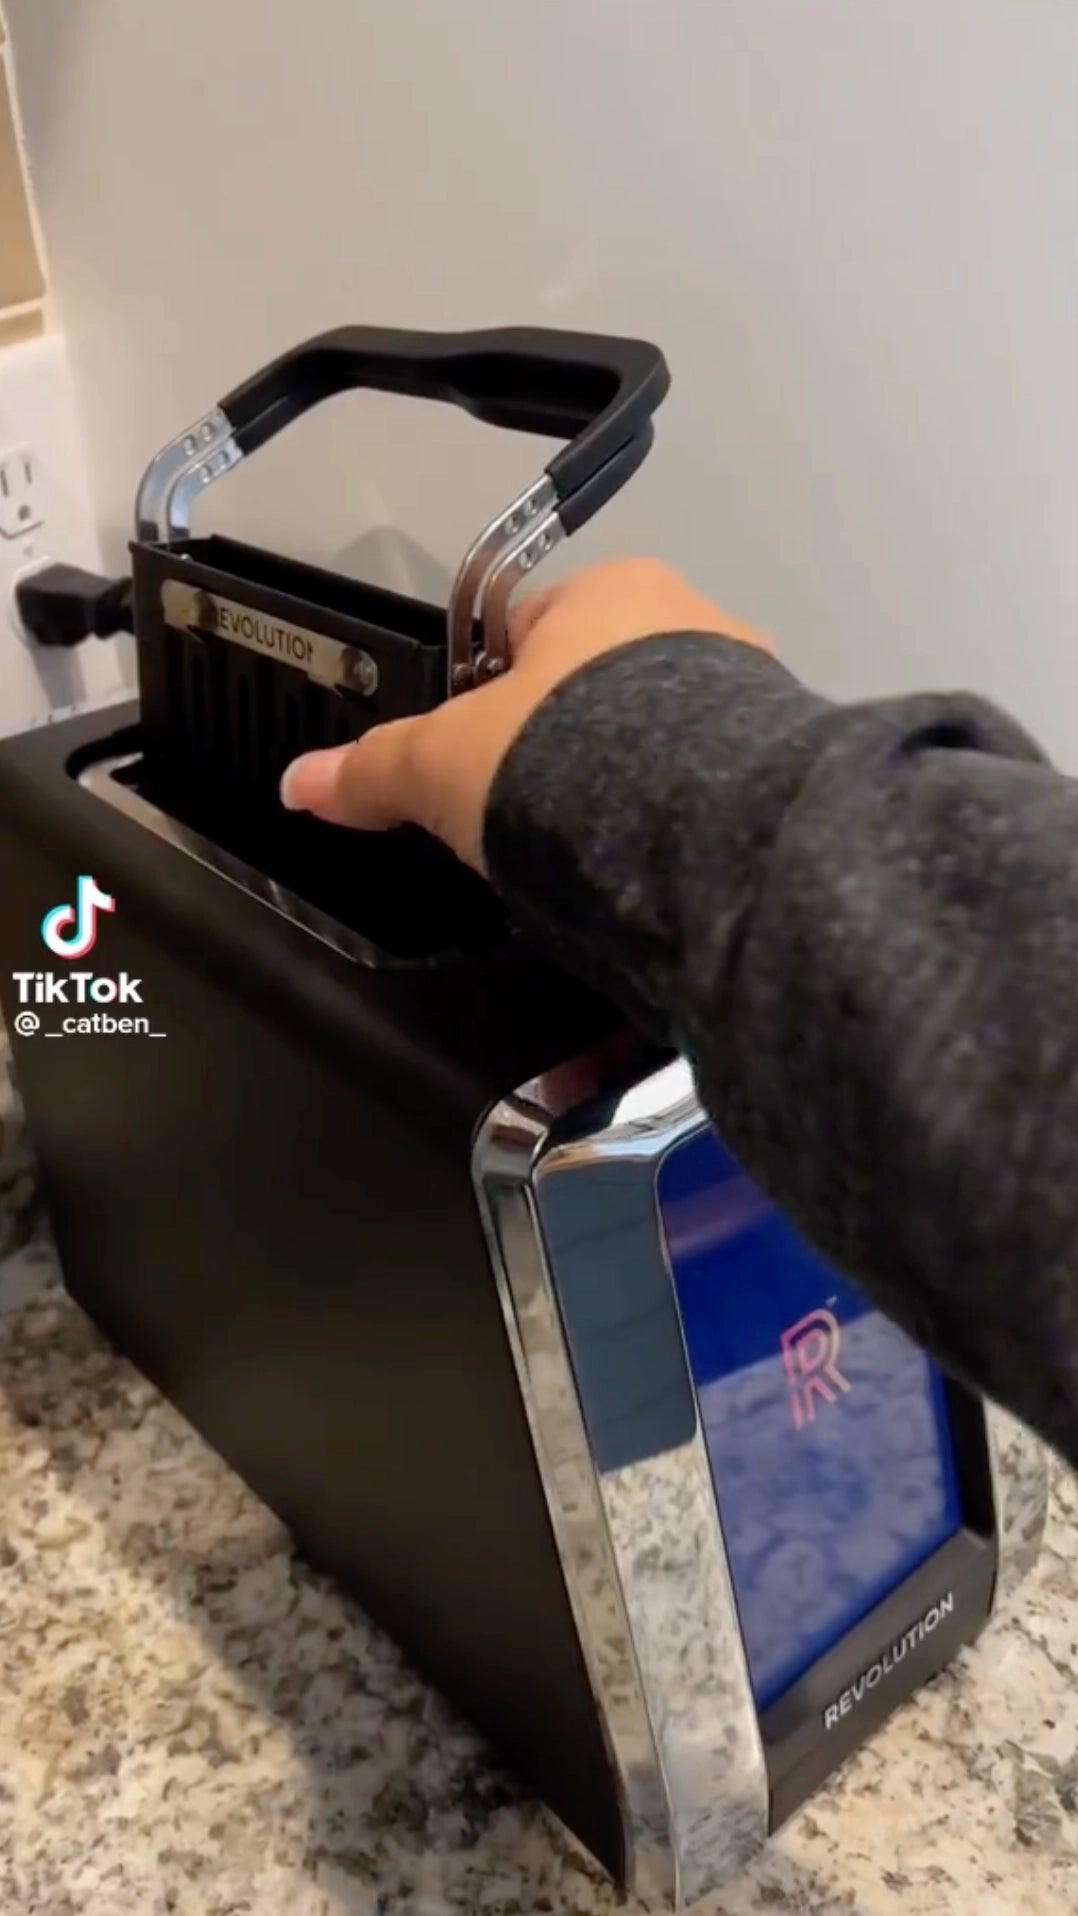 Finally, A Touchscreen Toaster Exists In The Revolution Cooking R180 -  Forbes Vetted